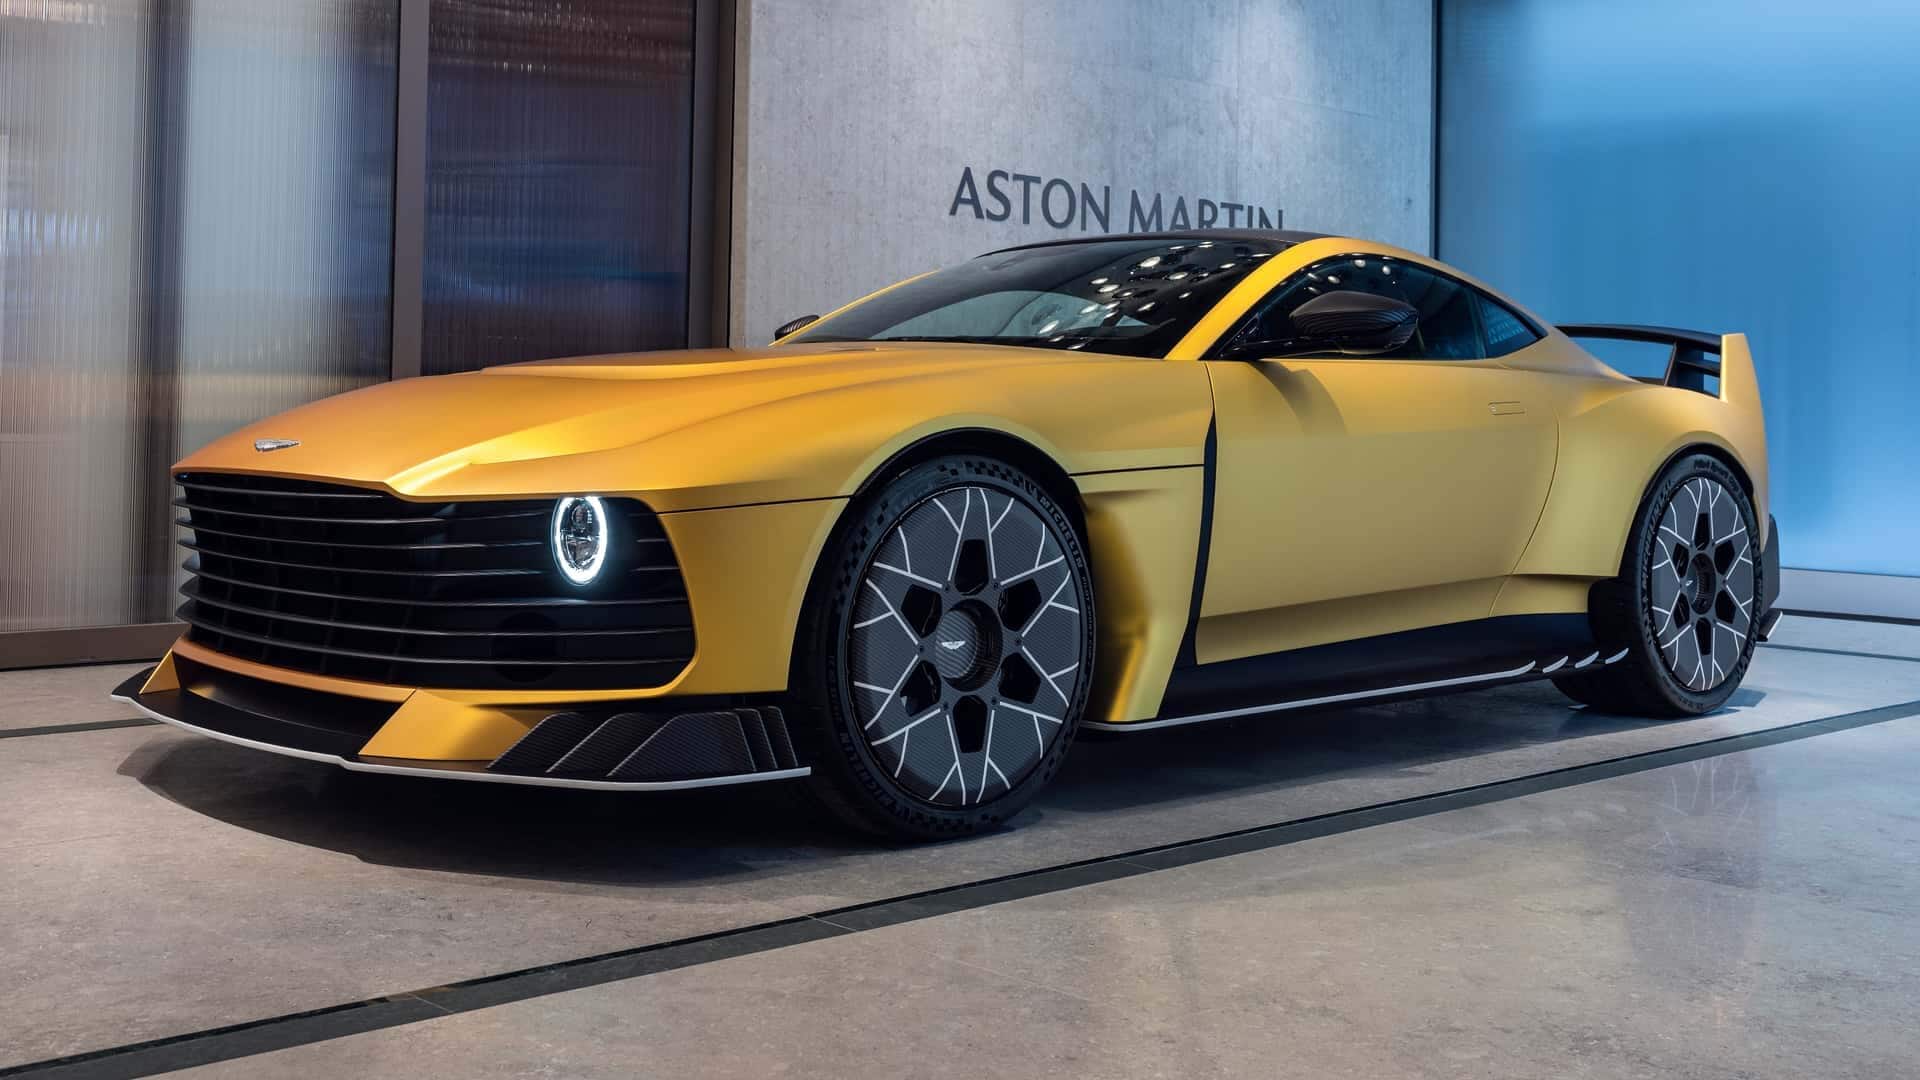 Aston Martin's latest supercar is inpired by F1 champ Alonso